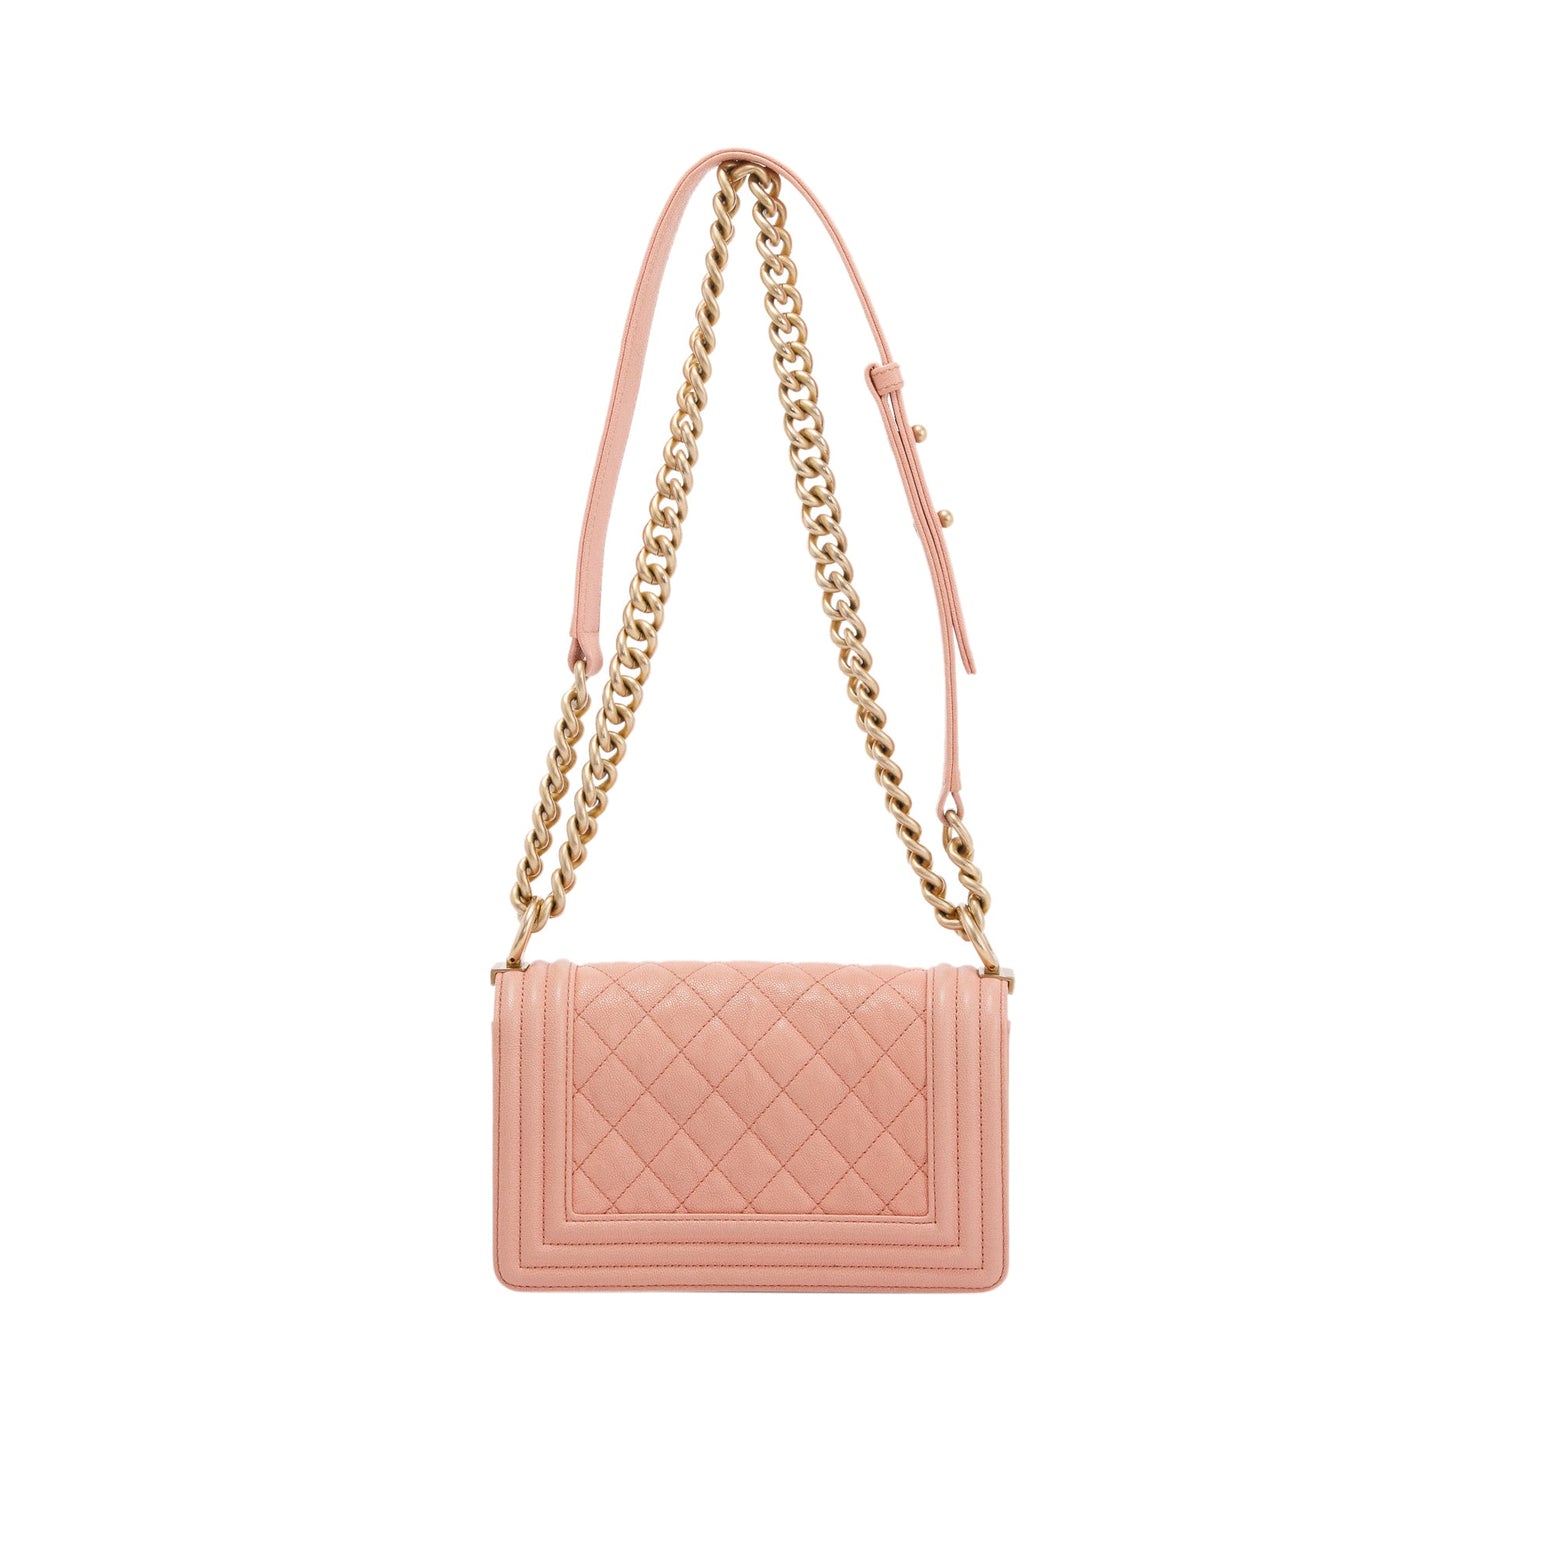 CHANEL  NUDE LIGHT PINK SMALL BOY BAG IN PATENT LEATHER WITH GOLD TONE  HARDWARE  Handbags  Accessories  2020  Sothebys